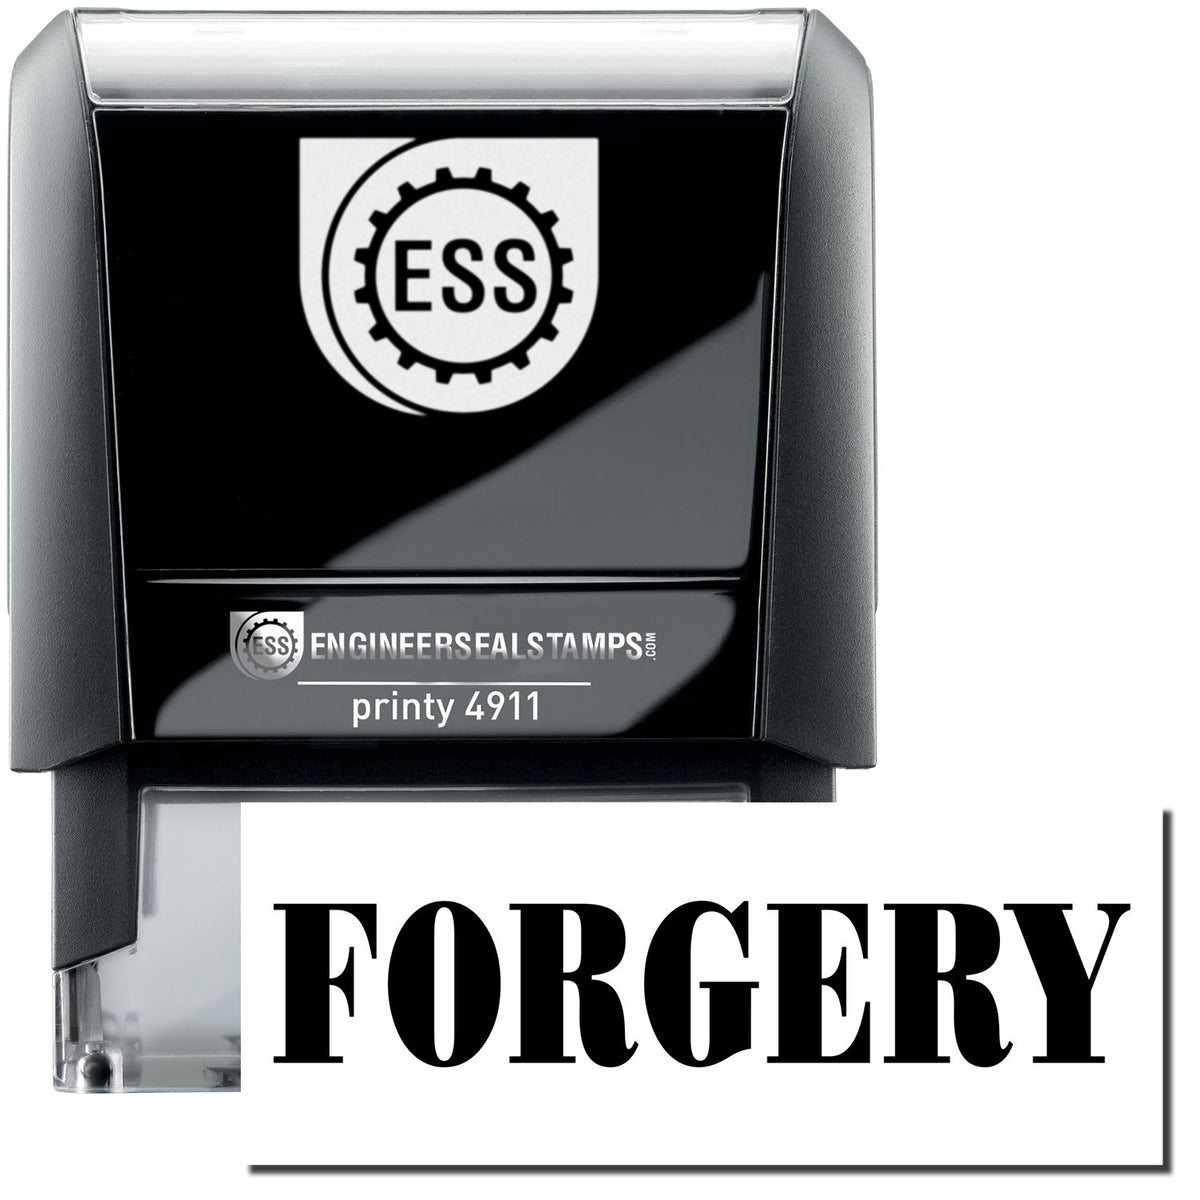 A self-inking stamp with a stamped image showing how the text &quot;FORGERY&quot; is displayed after stamping.